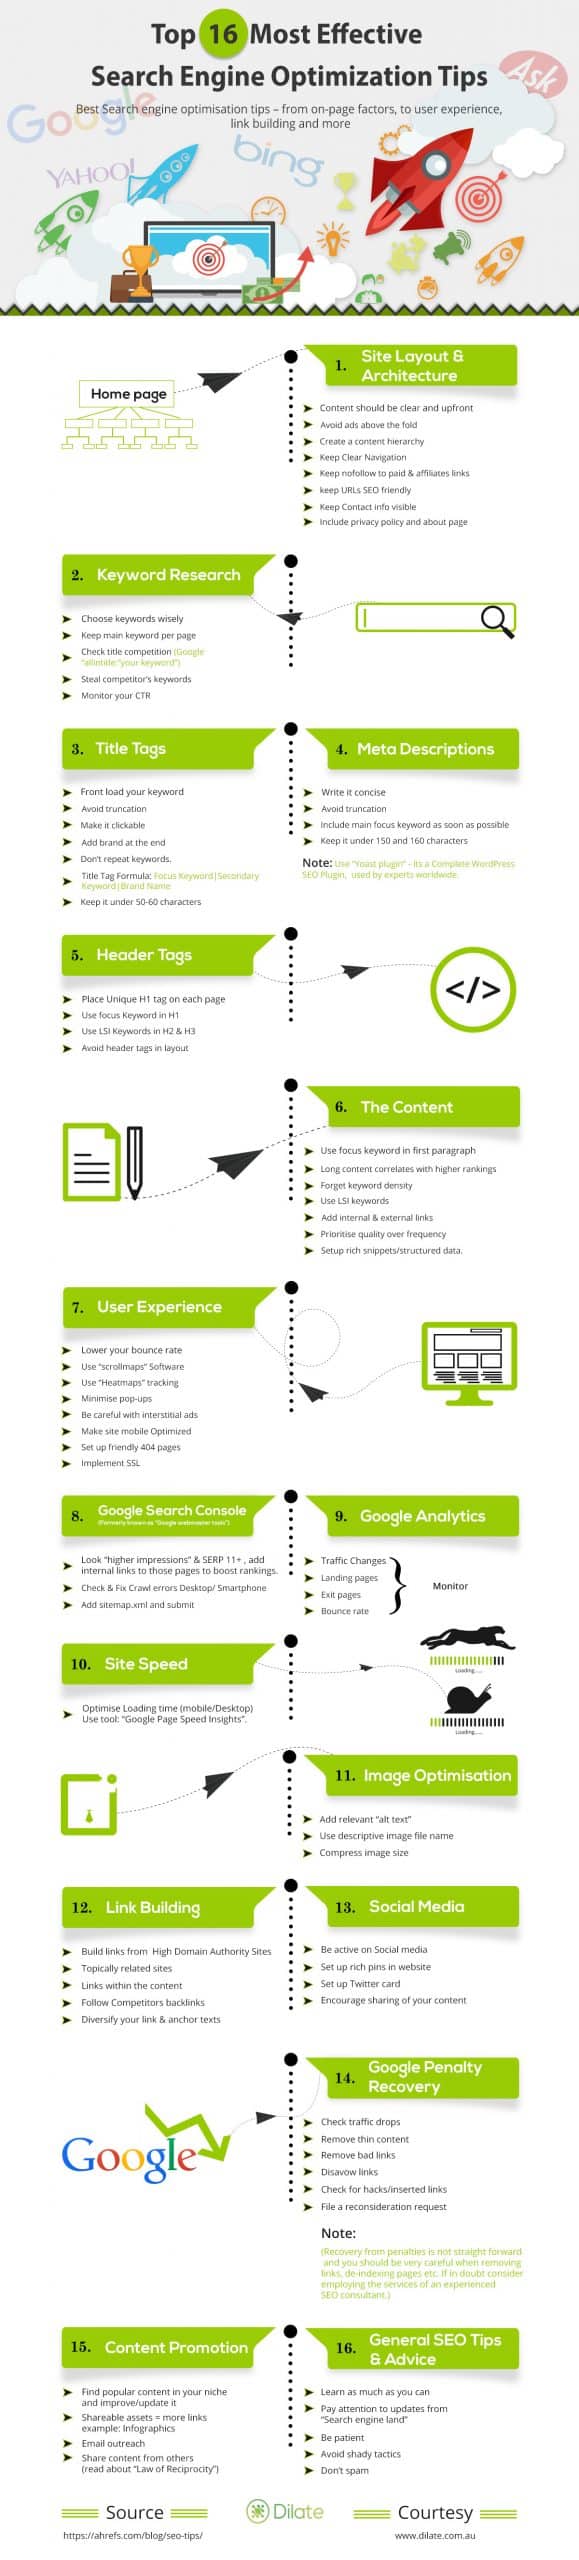 top 16 most effective search engine optimization tips 